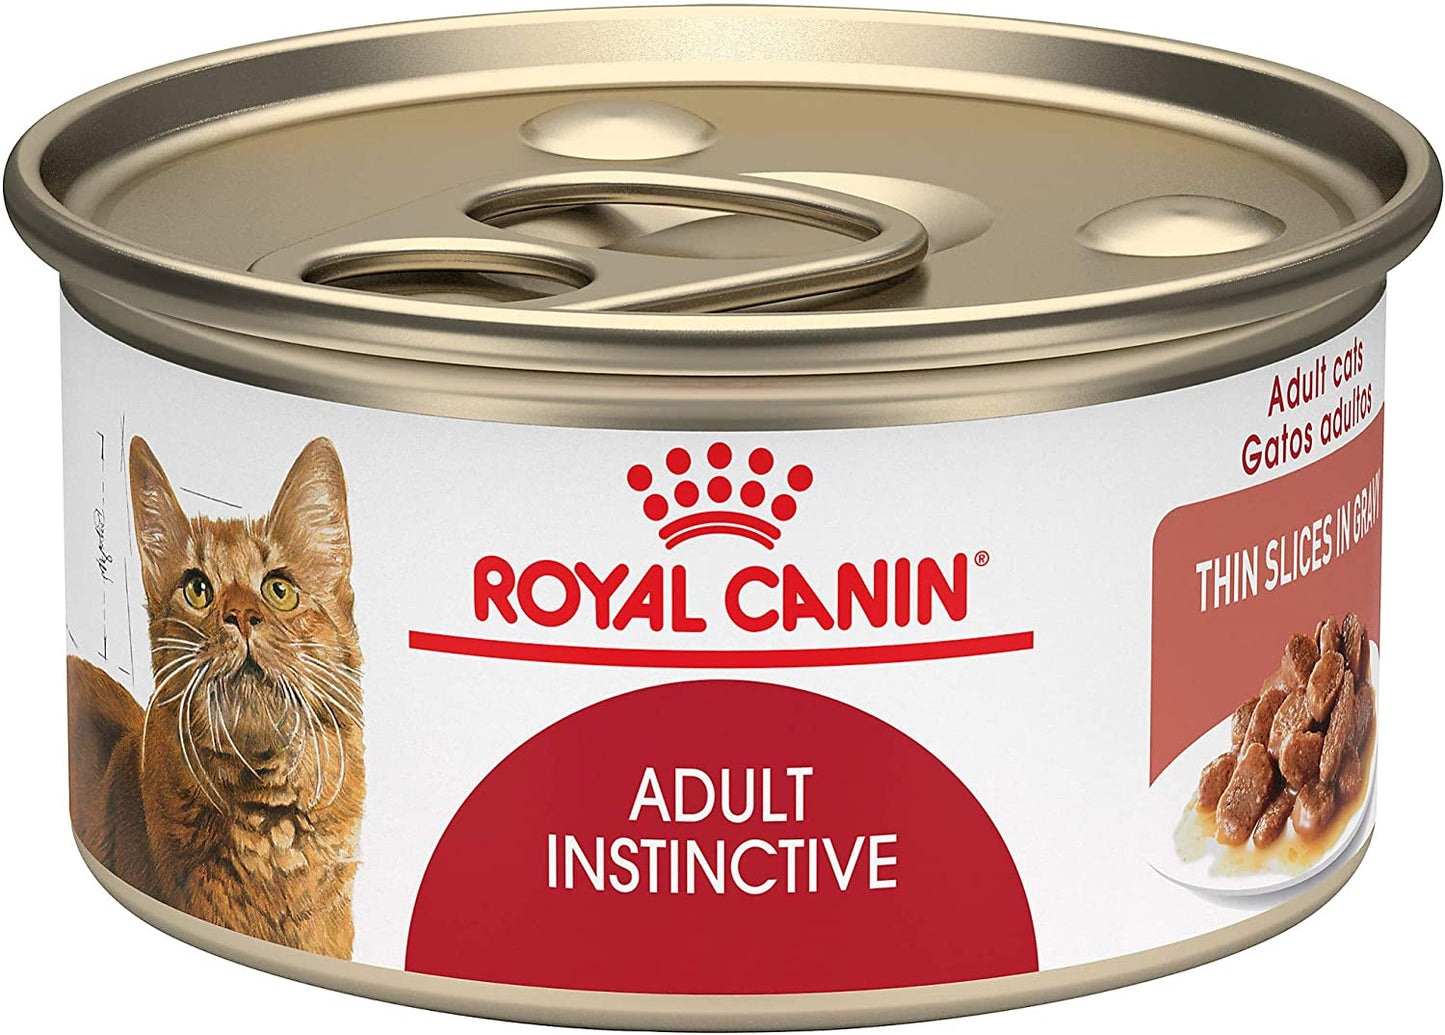 Royal Canin Adult Instinctive Thin Slices in Gravy